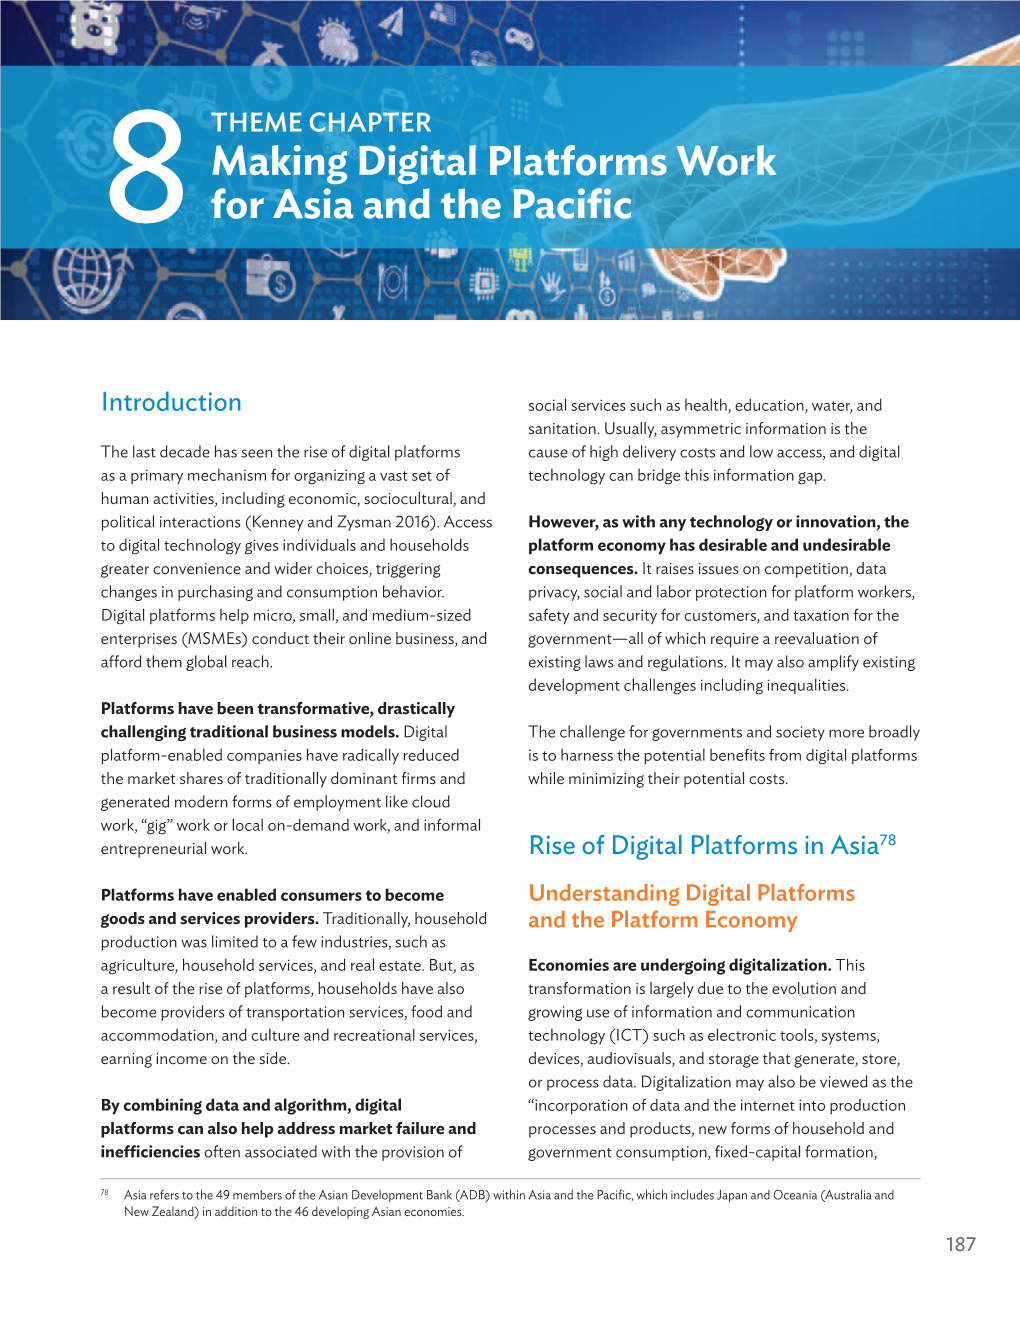 Making Digital Platforms Work for Asia and the Pacific 189